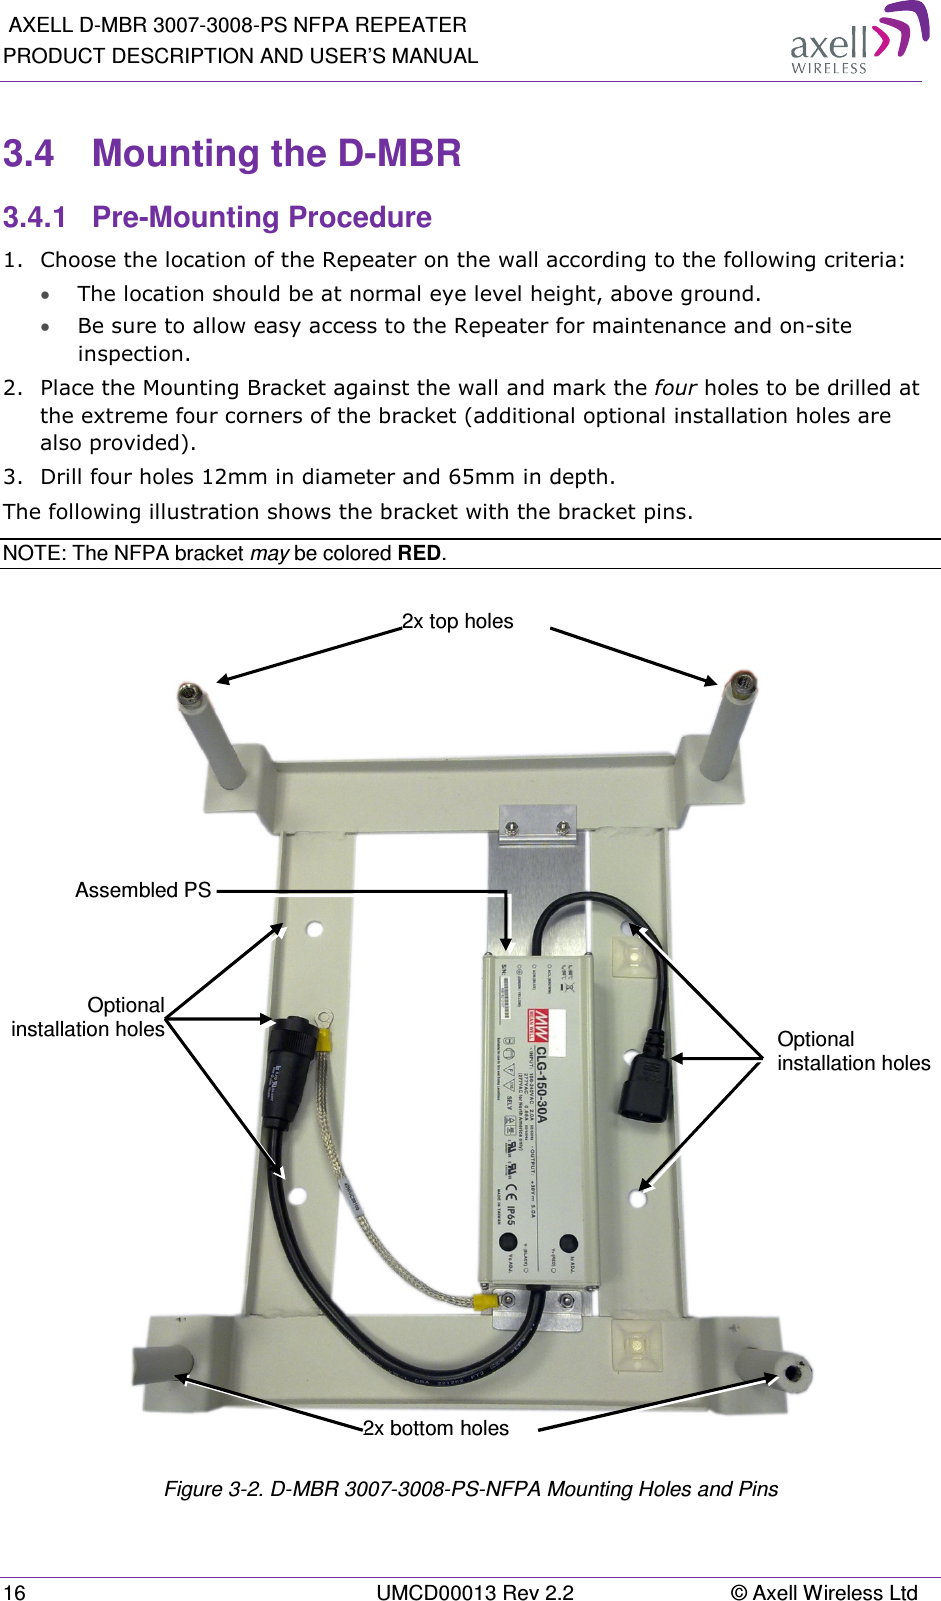  AXELL D-MBR 3007-3008-PS NFPA REPEATER PRODUCT DESCRIPTION AND USER’S MANUAL 16  UMCD00013 Rev 2.2  © Axell Wireless Ltd 3.4  Mounting the D-MBR 3.4.1  Pre-Mounting Procedure 1.  Choose the location of the Repeater on the wall according to the following criteria: • The location should be at normal eye level height, above ground. • Be sure to allow easy access to the Repeater for maintenance and on-site inspection. 2.  Place the Mounting Bracket against the wall and mark the four holes to be drilled at the extreme four corners of the bracket (additional optional installation holes are also provided). 3.  Drill four holes 12mm in diameter and 65mm in depth. The following illustration shows the bracket with the bracket pins. NOTE: The NFPA bracket may be colored RED.     Figure  3-2. D-MBR 3007-3008-PS-NFPA Mounting Holes and Pins Optional installation holesOptional installation holes 2x bottom holes 2x top holes Assembled PS 